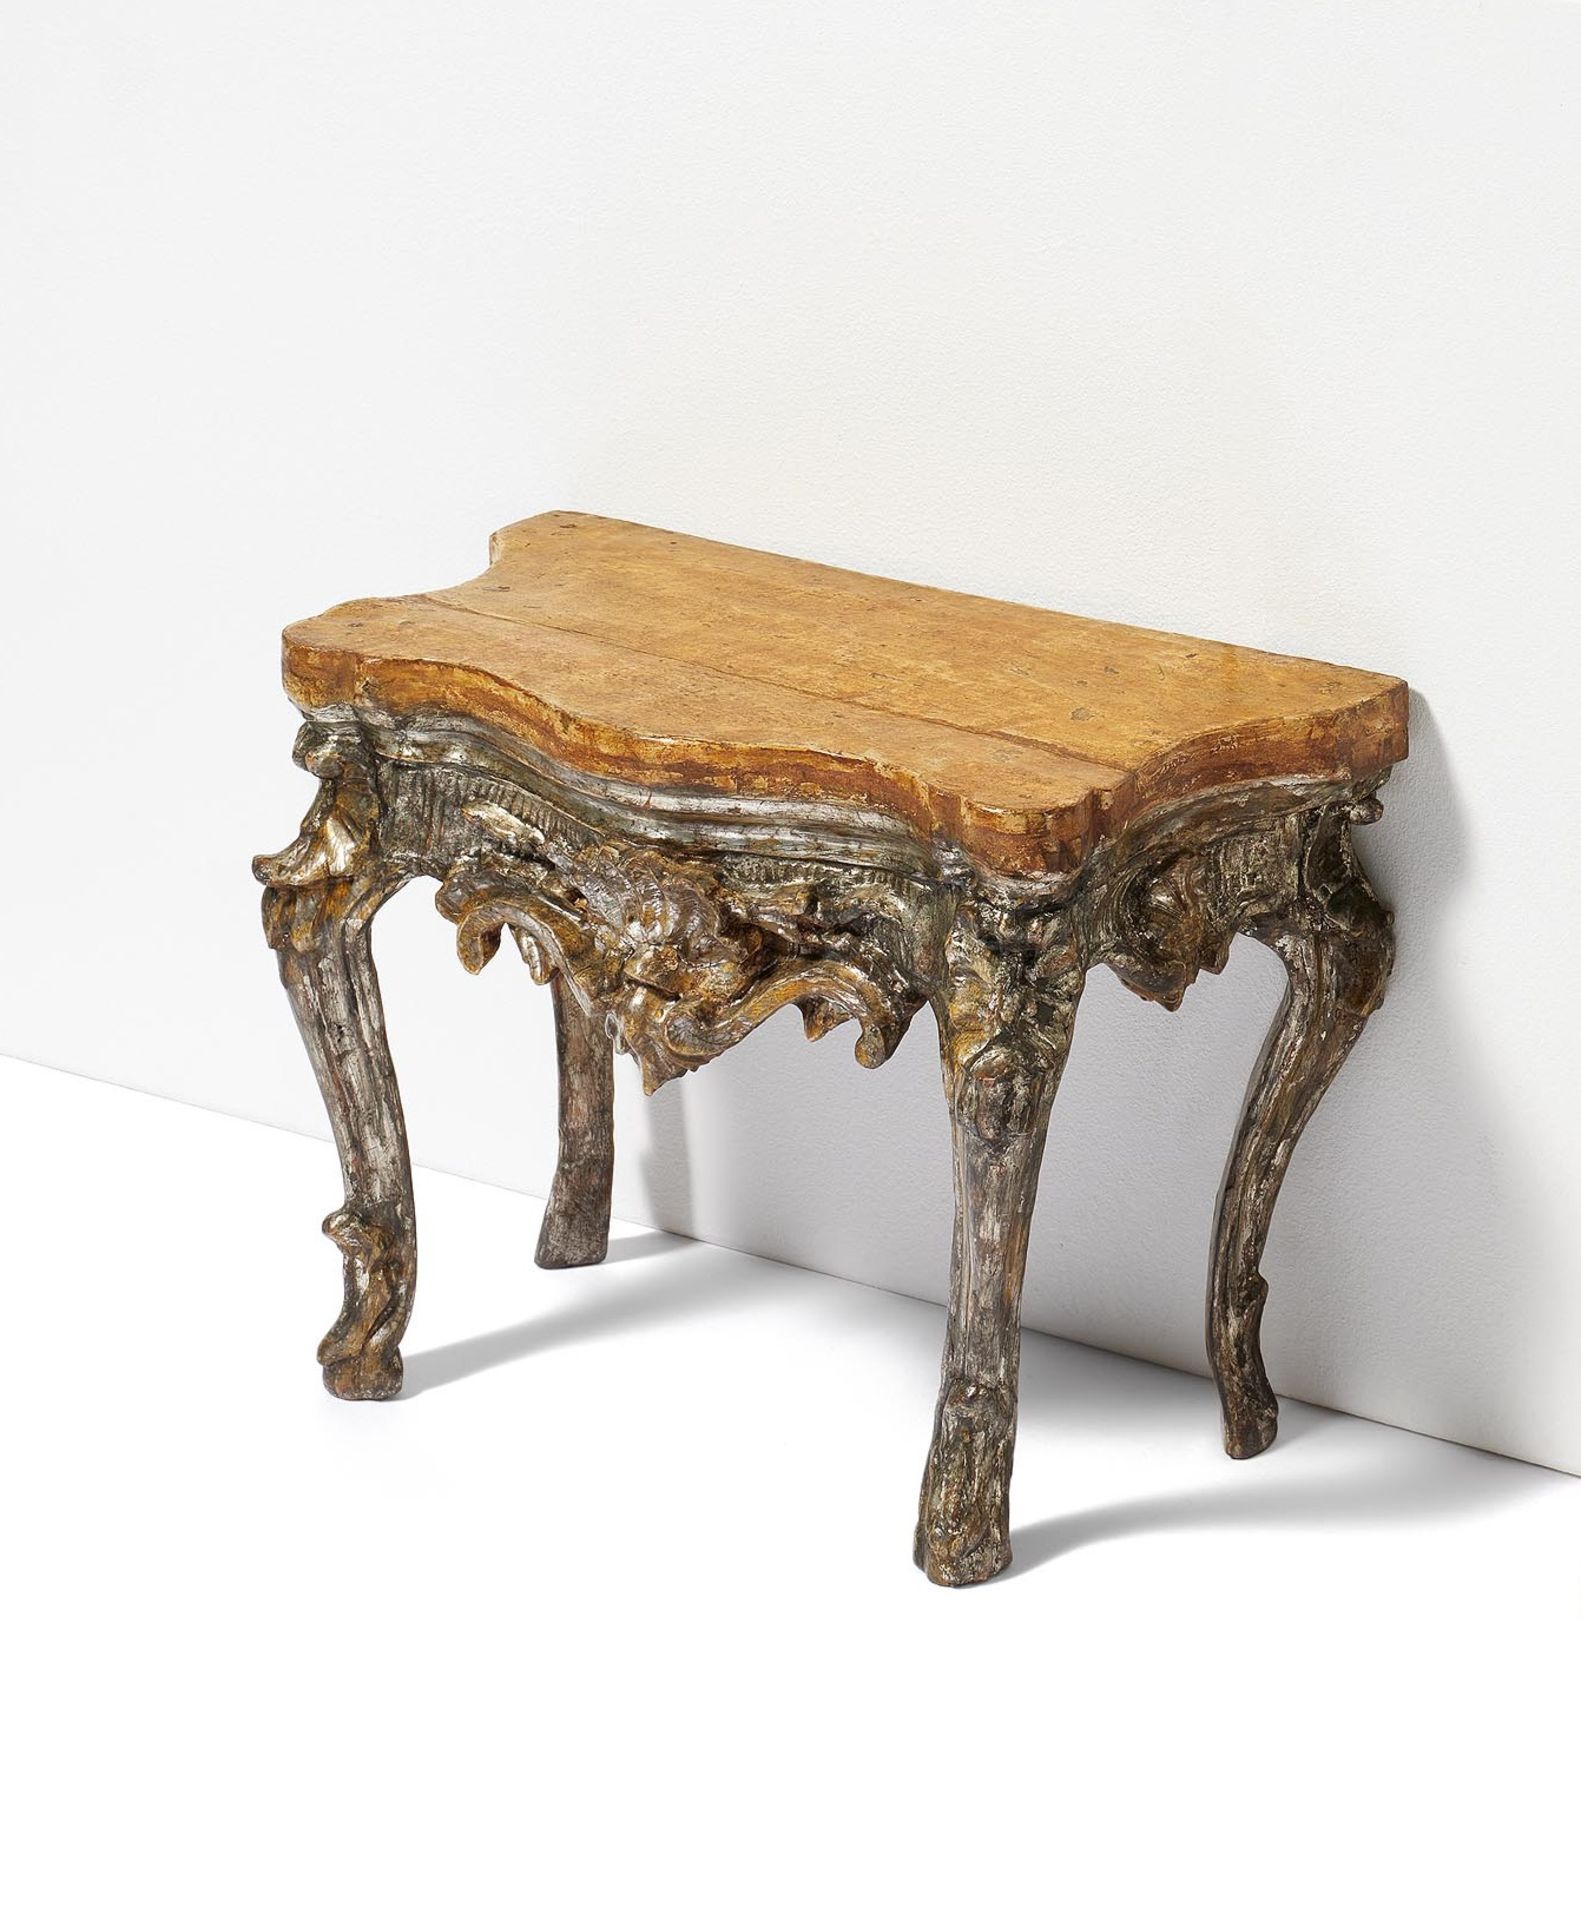 Venice: SMALL WOODEN MINIATURE CONSOLE TABLE WITH TROMPE L'OEUIL MARBLE PLATE - Image 2 of 6